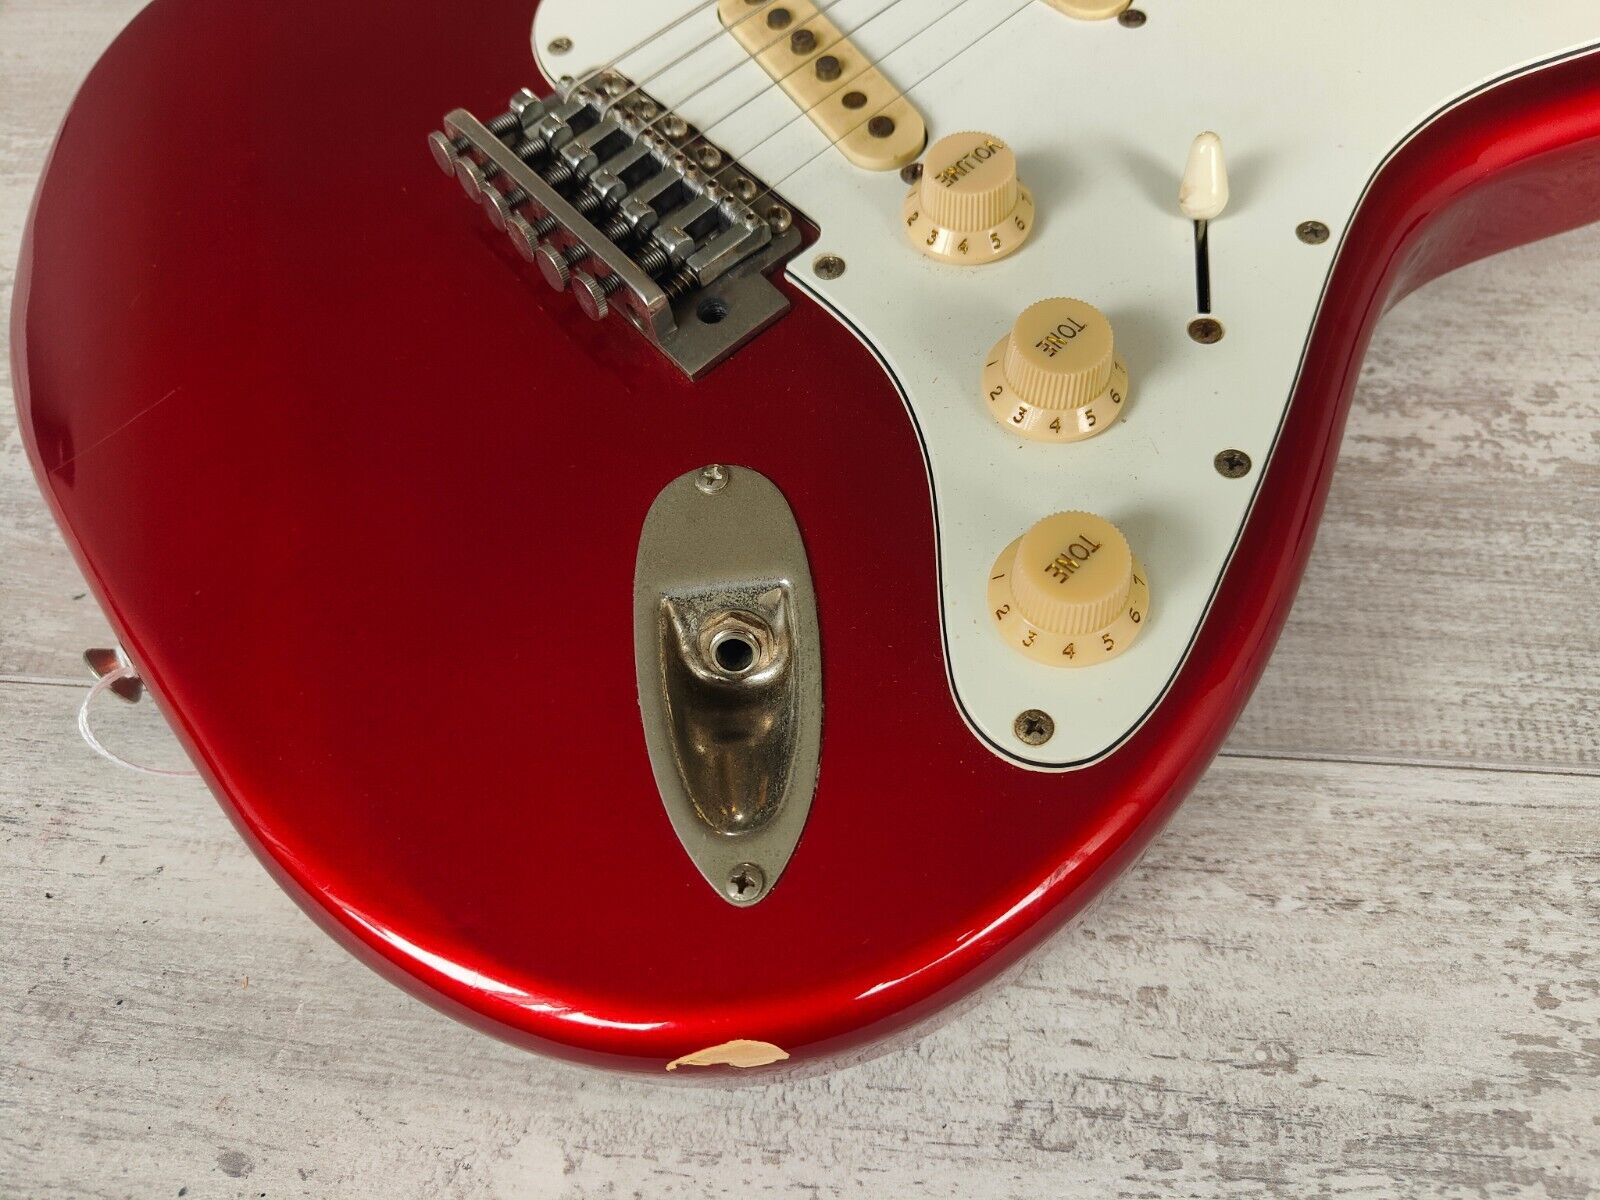 1981 Yamaha Japan ST800R Stratocaster w/Locking Nut (Candy Apple Red)